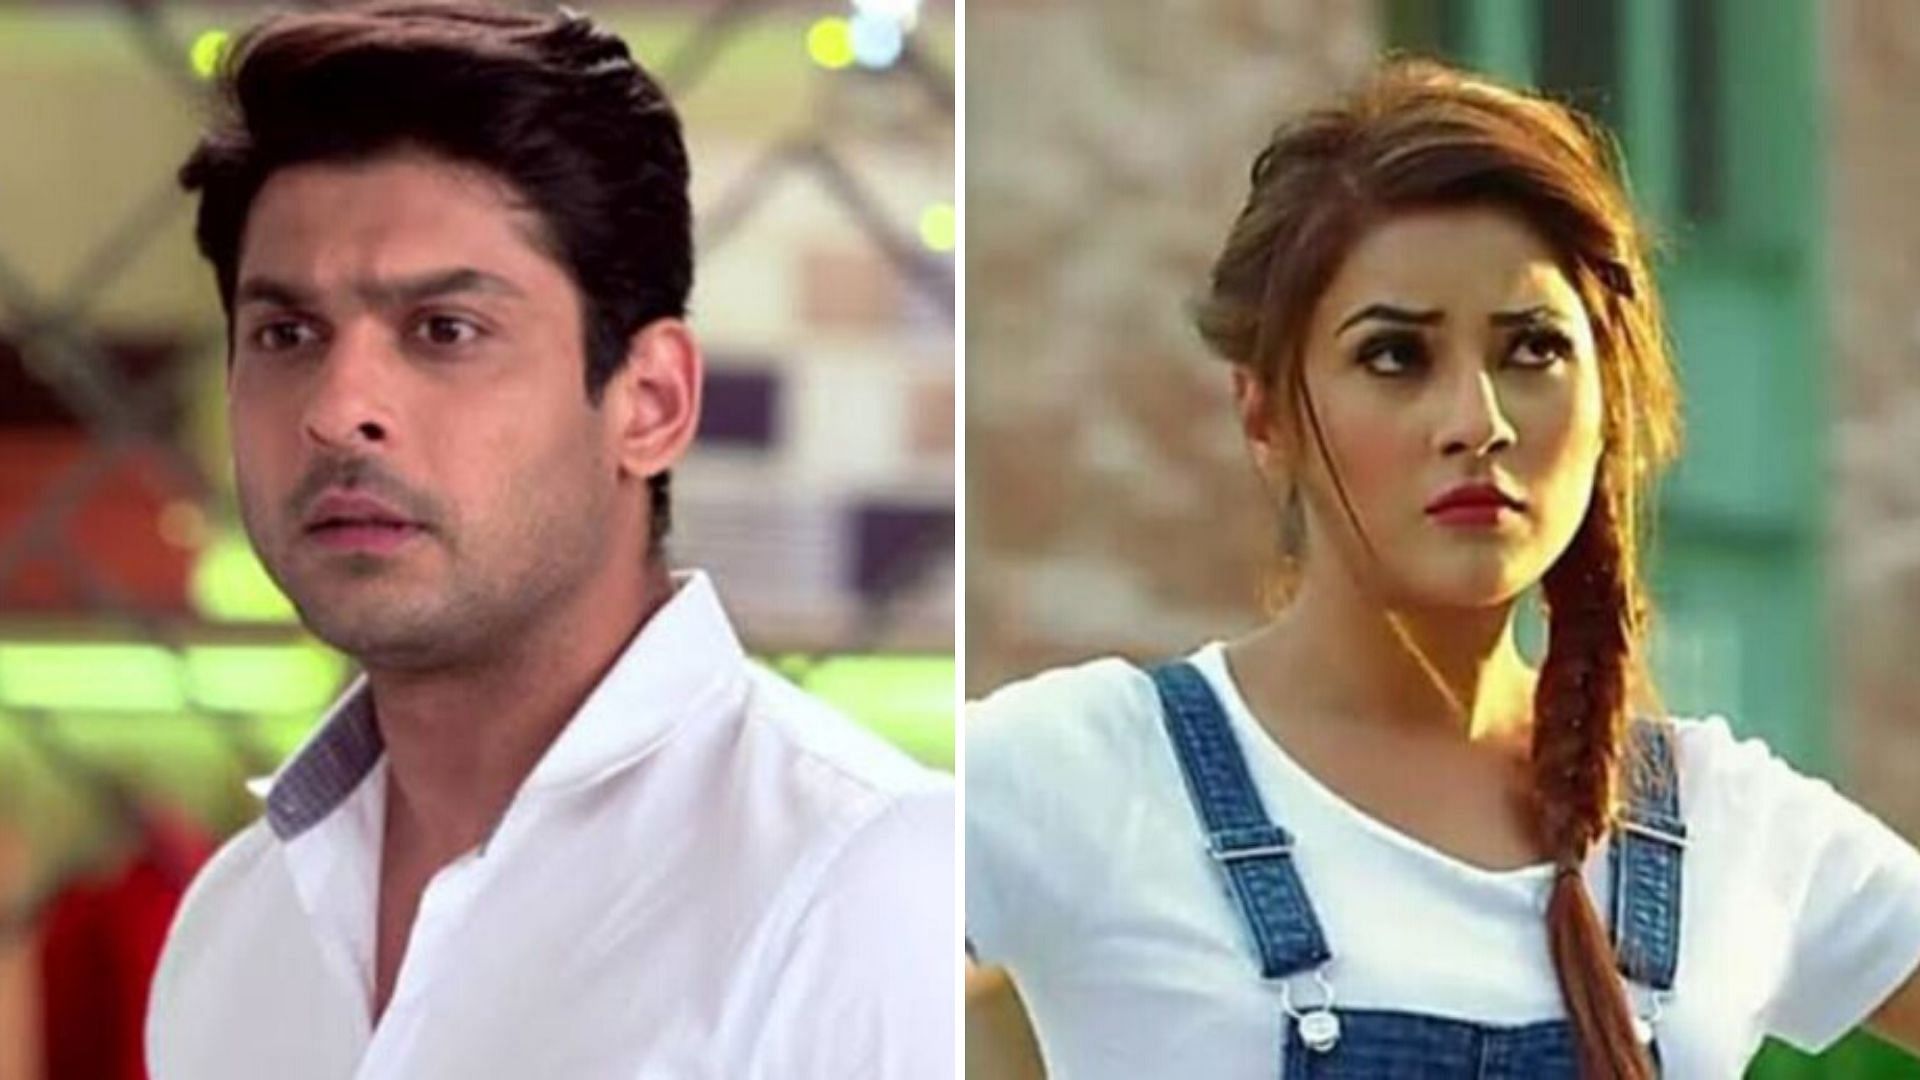 Sidharth Shukla and Shehnaaz Gill get into an argument in <i>Bigg Boss 13</i>.